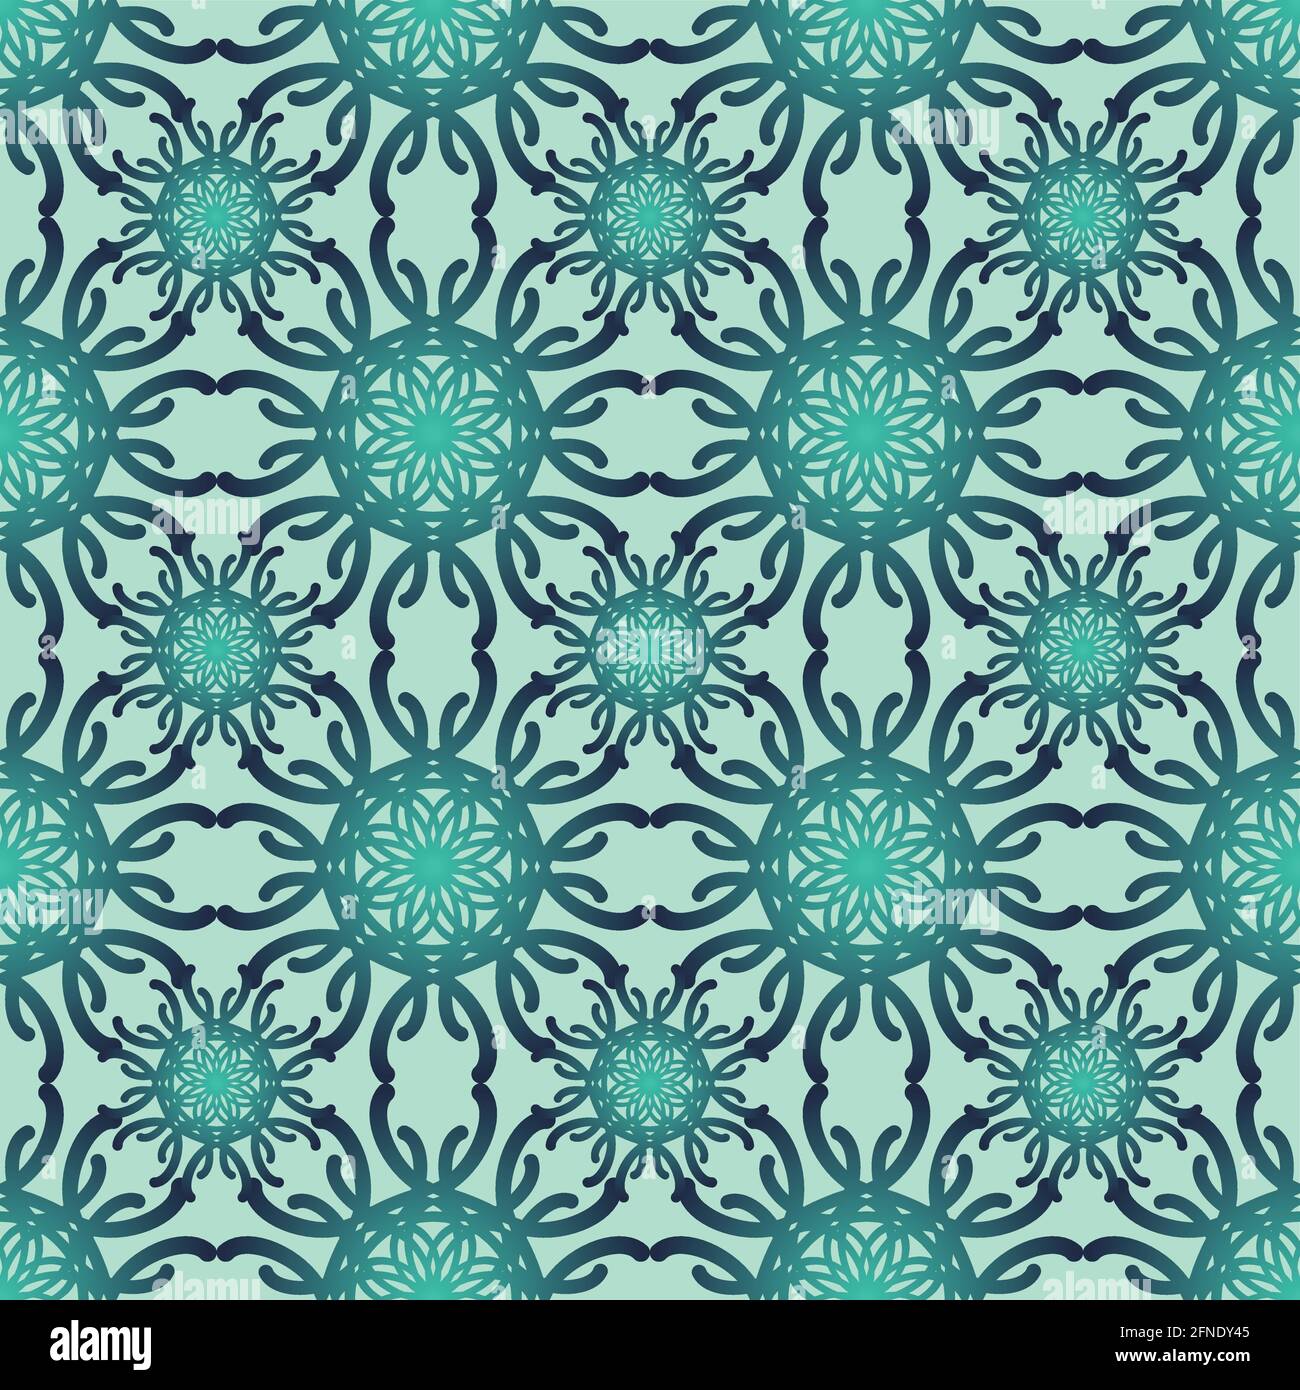 Classic geometry art deco patterns in trendy green color. Symmetric floral motif. Repeatable decorative vector background tile in damask design Stock Vector